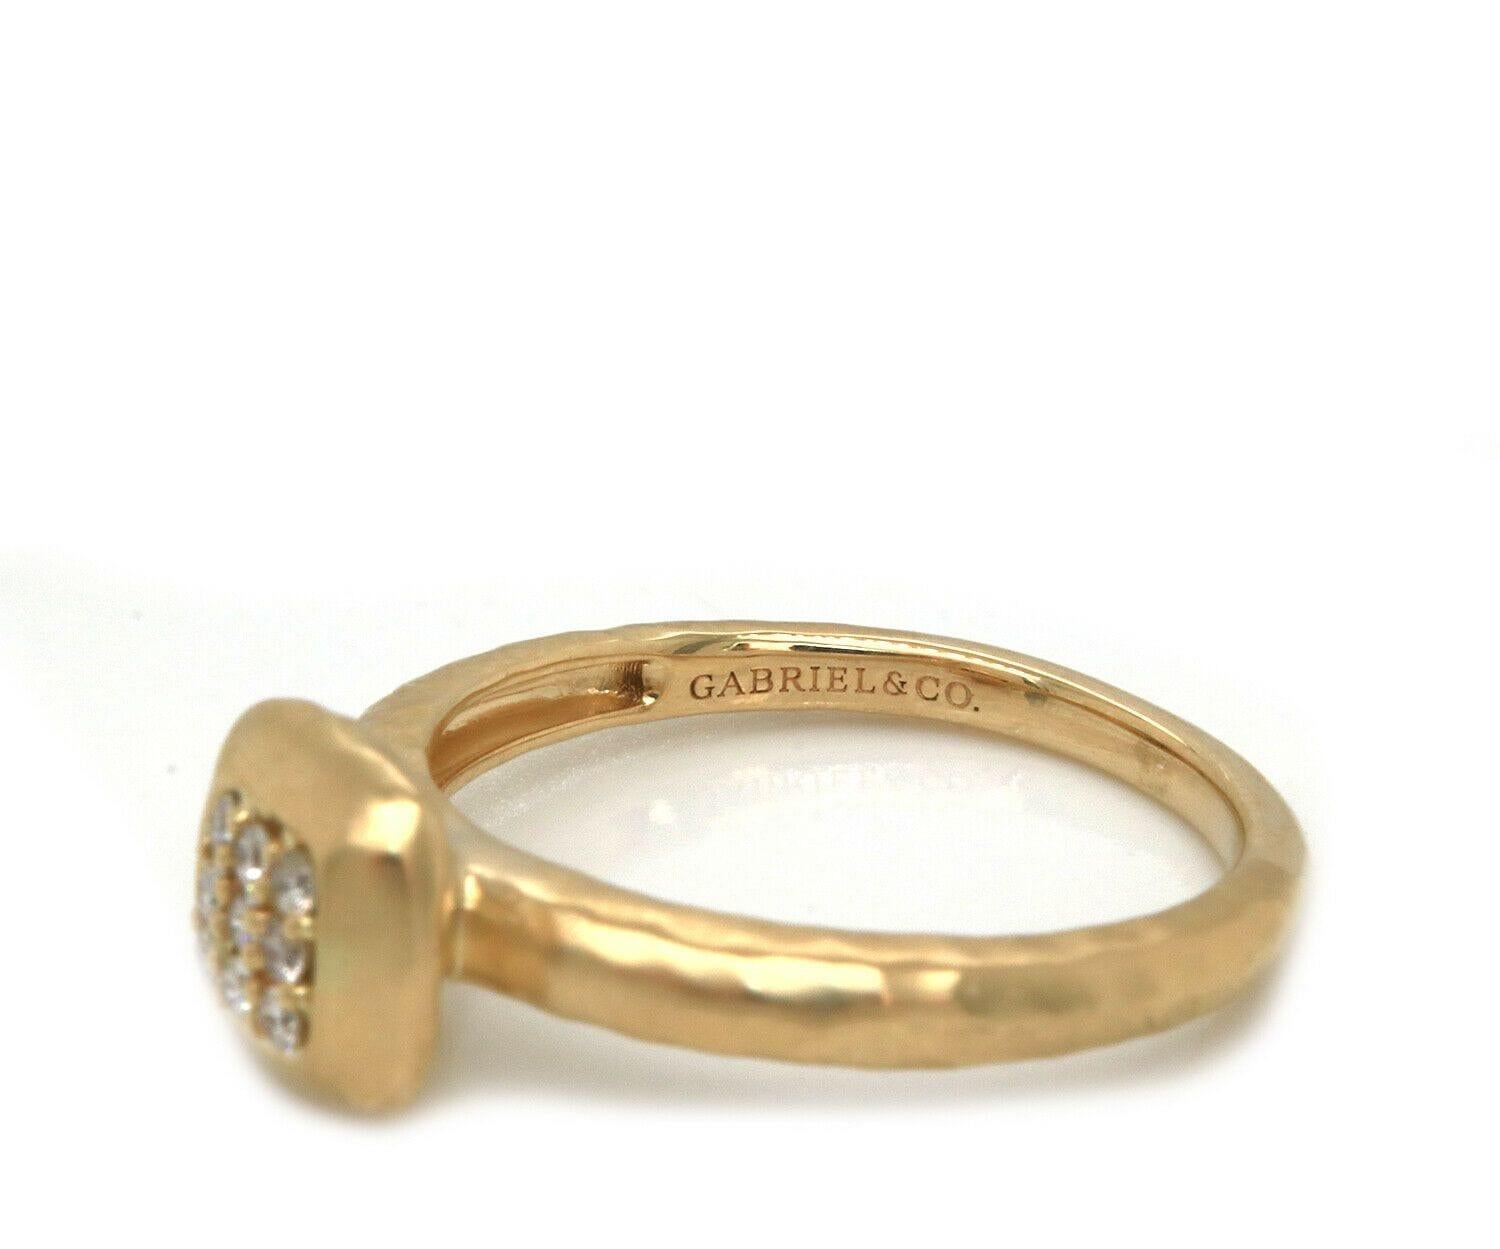 New Gabriel & Co. 0.09ctw Pave Diamond Ring in 14K Yellow Gold In New Condition For Sale In Vienna, VA